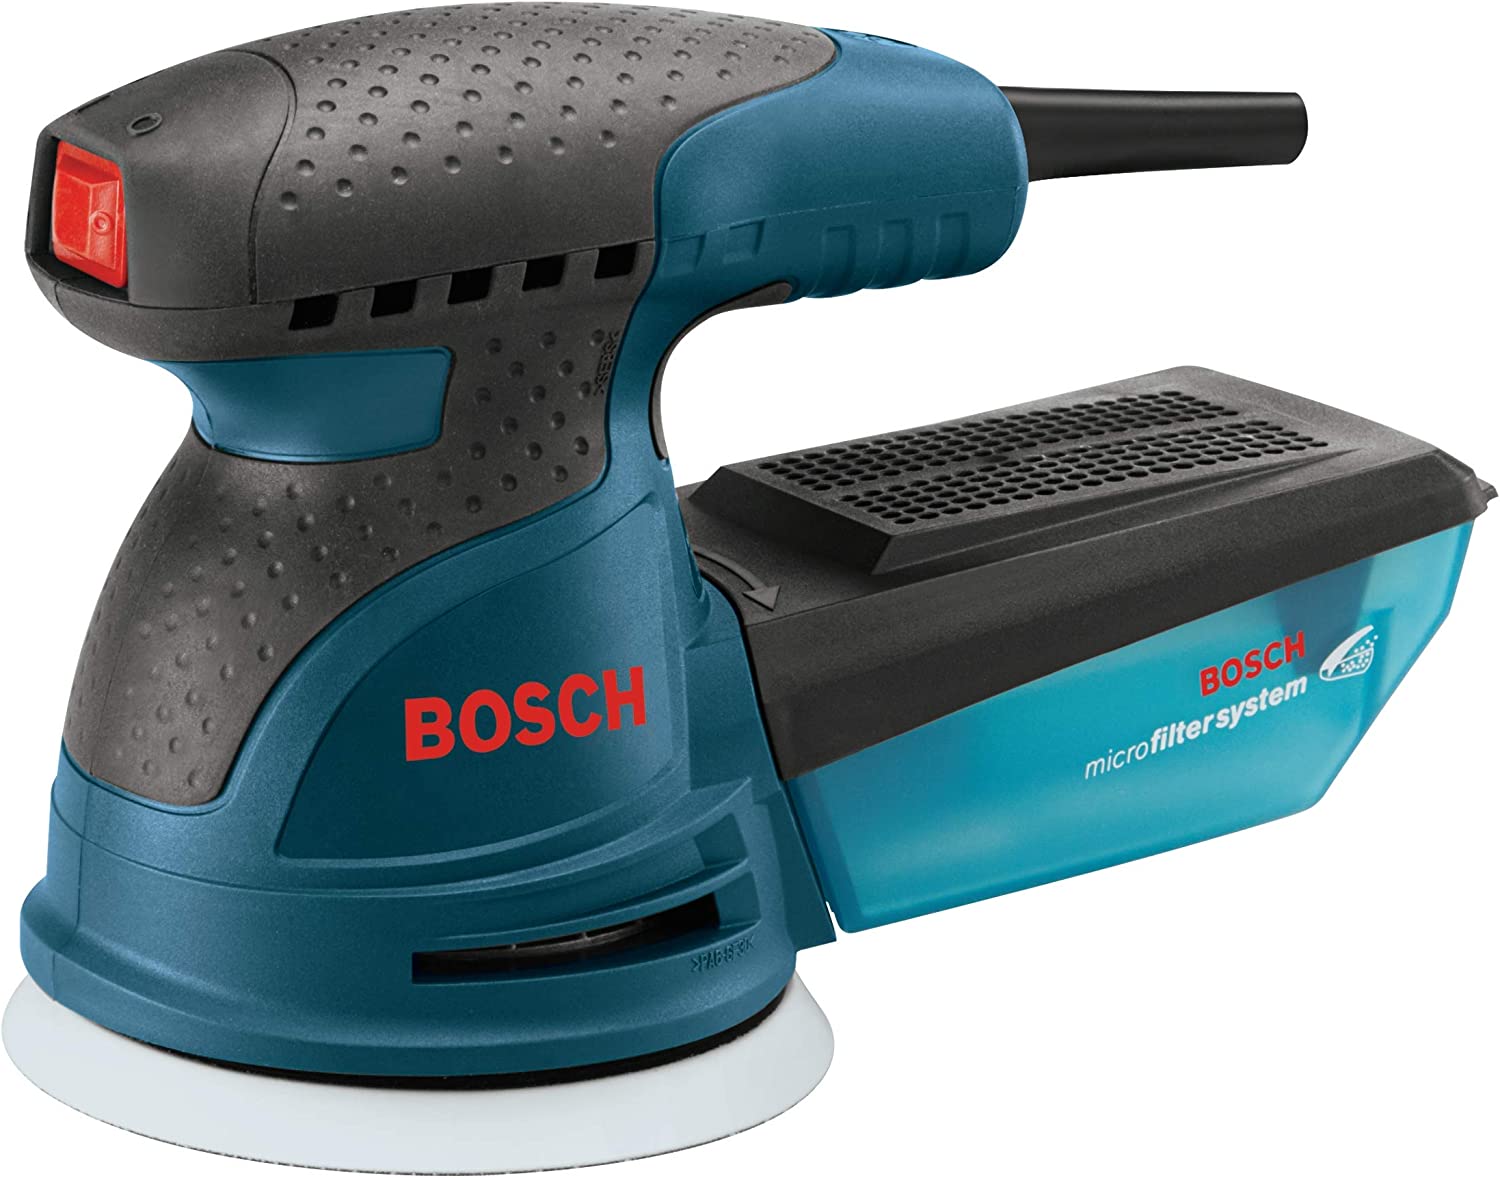 BOSCH ROS20VSC Palm Sander 2.5 Amp 5 In. Corded Variable Speed Random Orbital Sander Polisher Kit with Dust Collector and Soft Carrying Bag